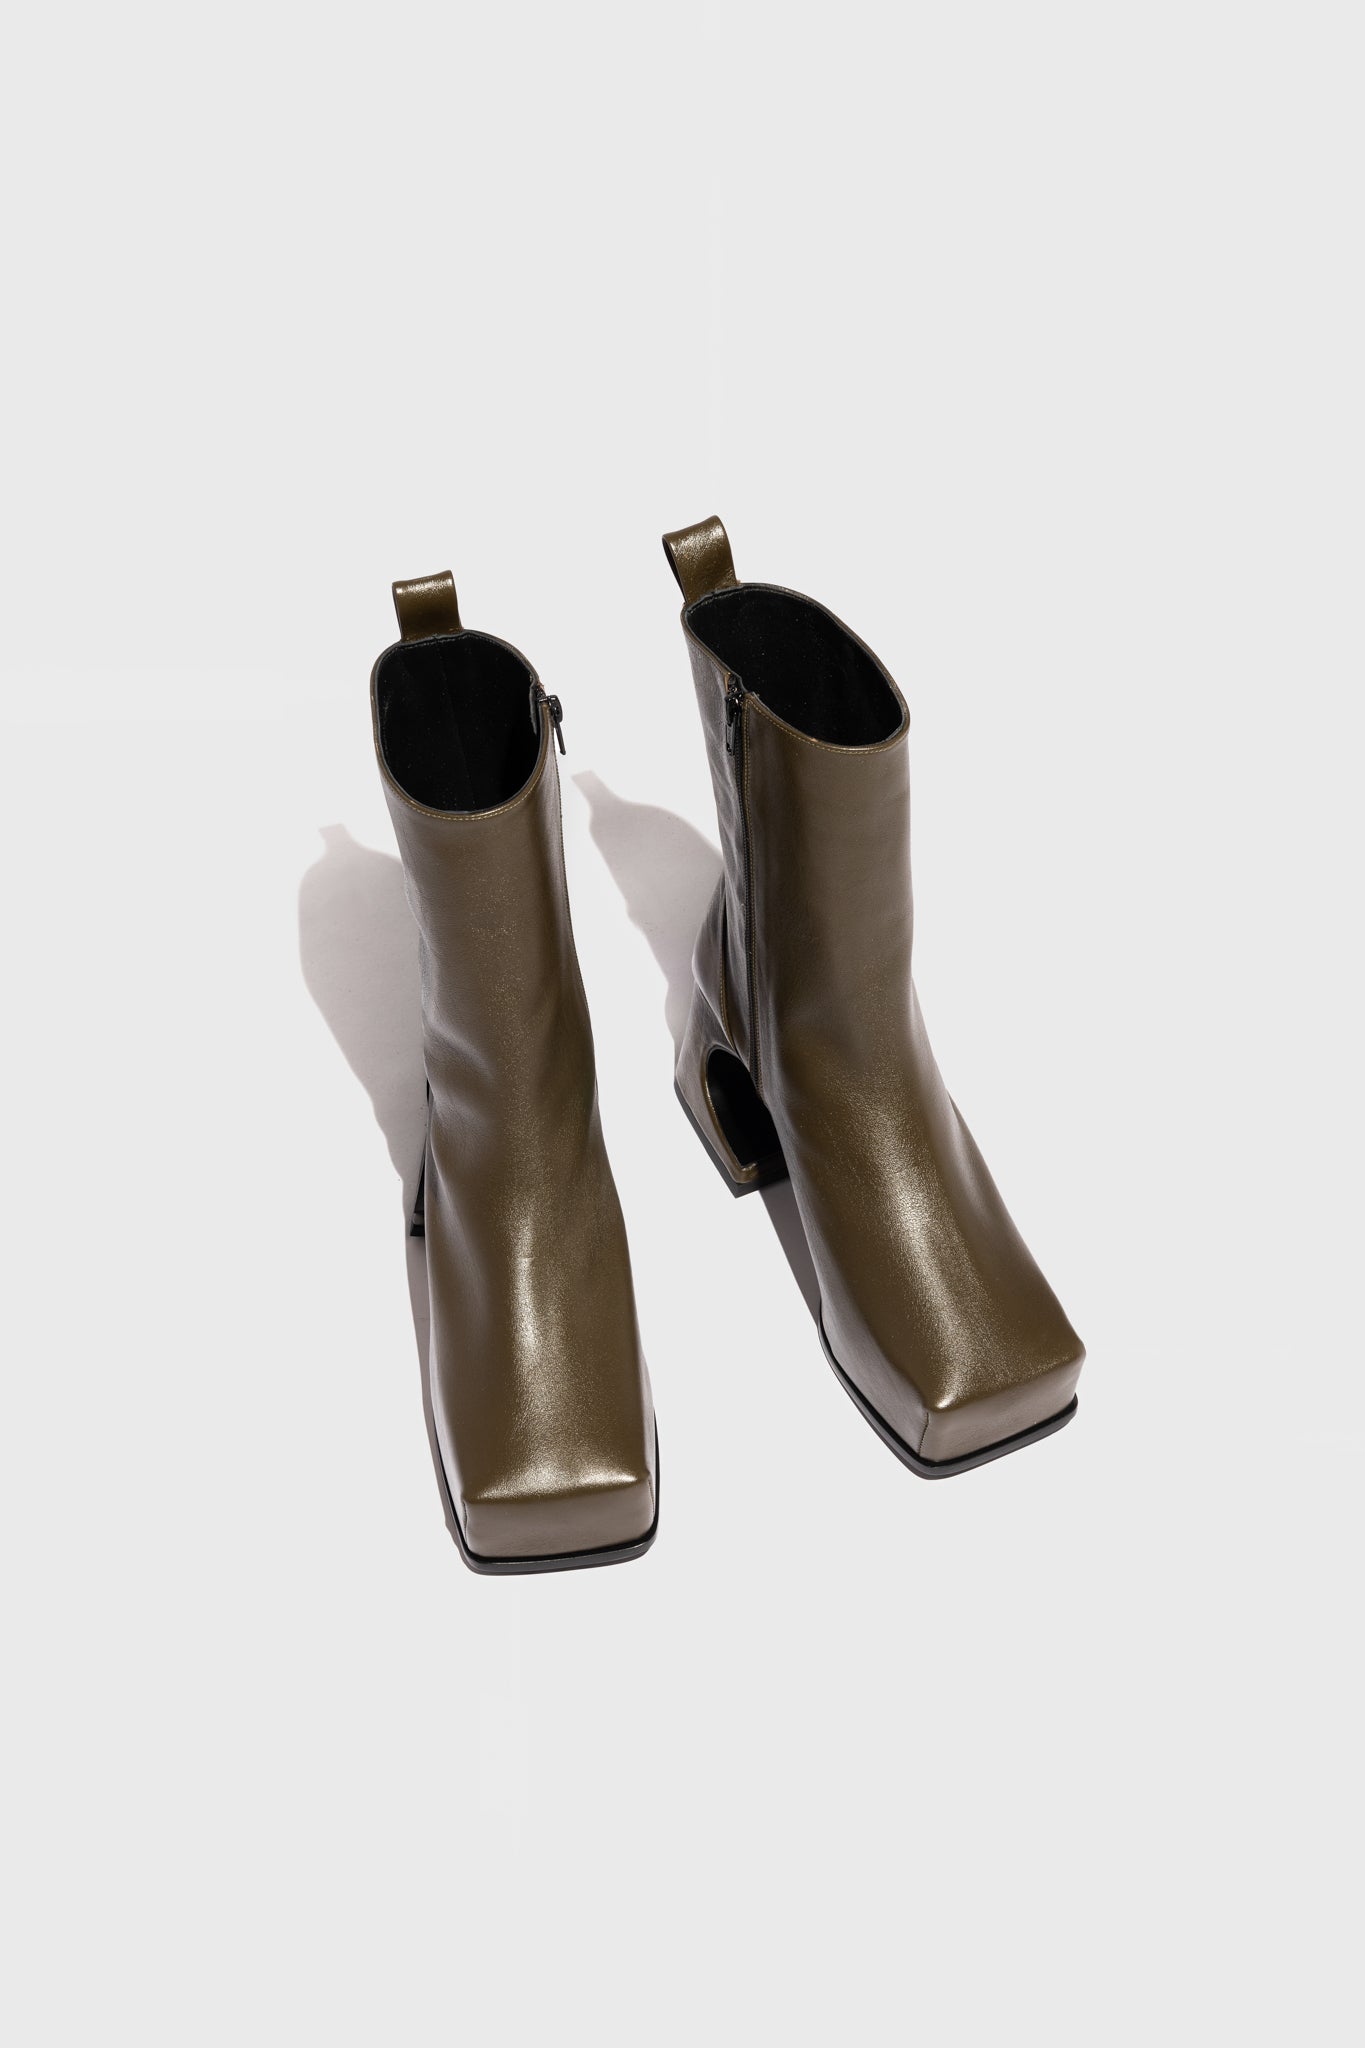 Your Olive Tree Roxy Boots